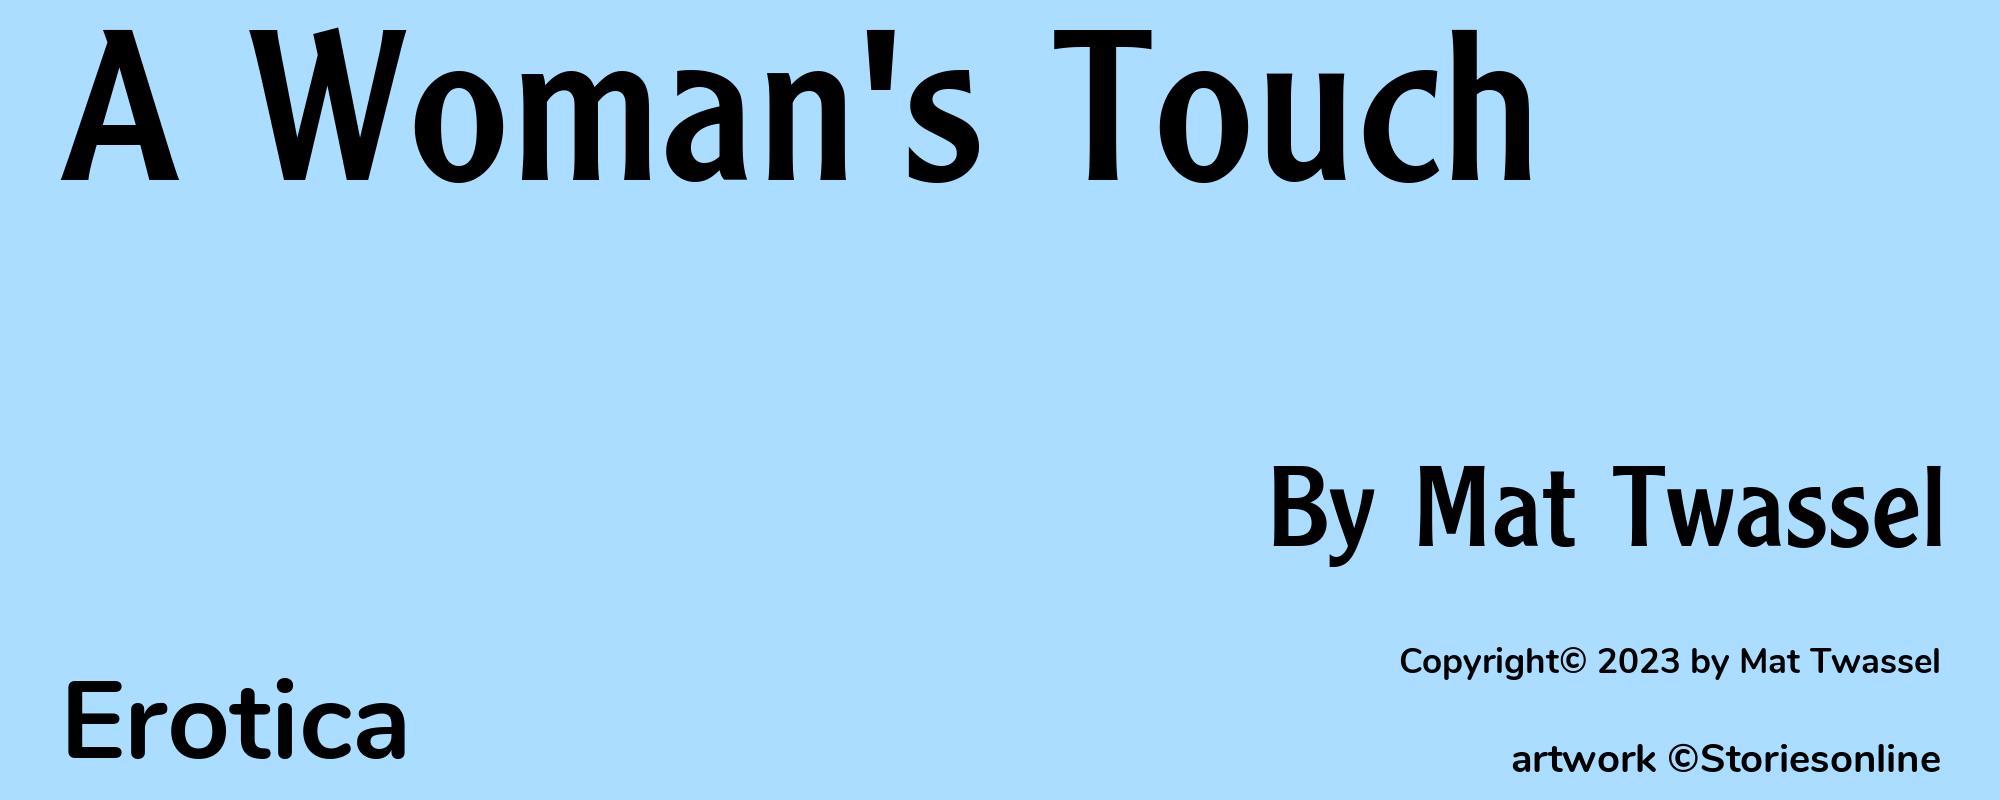 A Woman's Touch - Cover